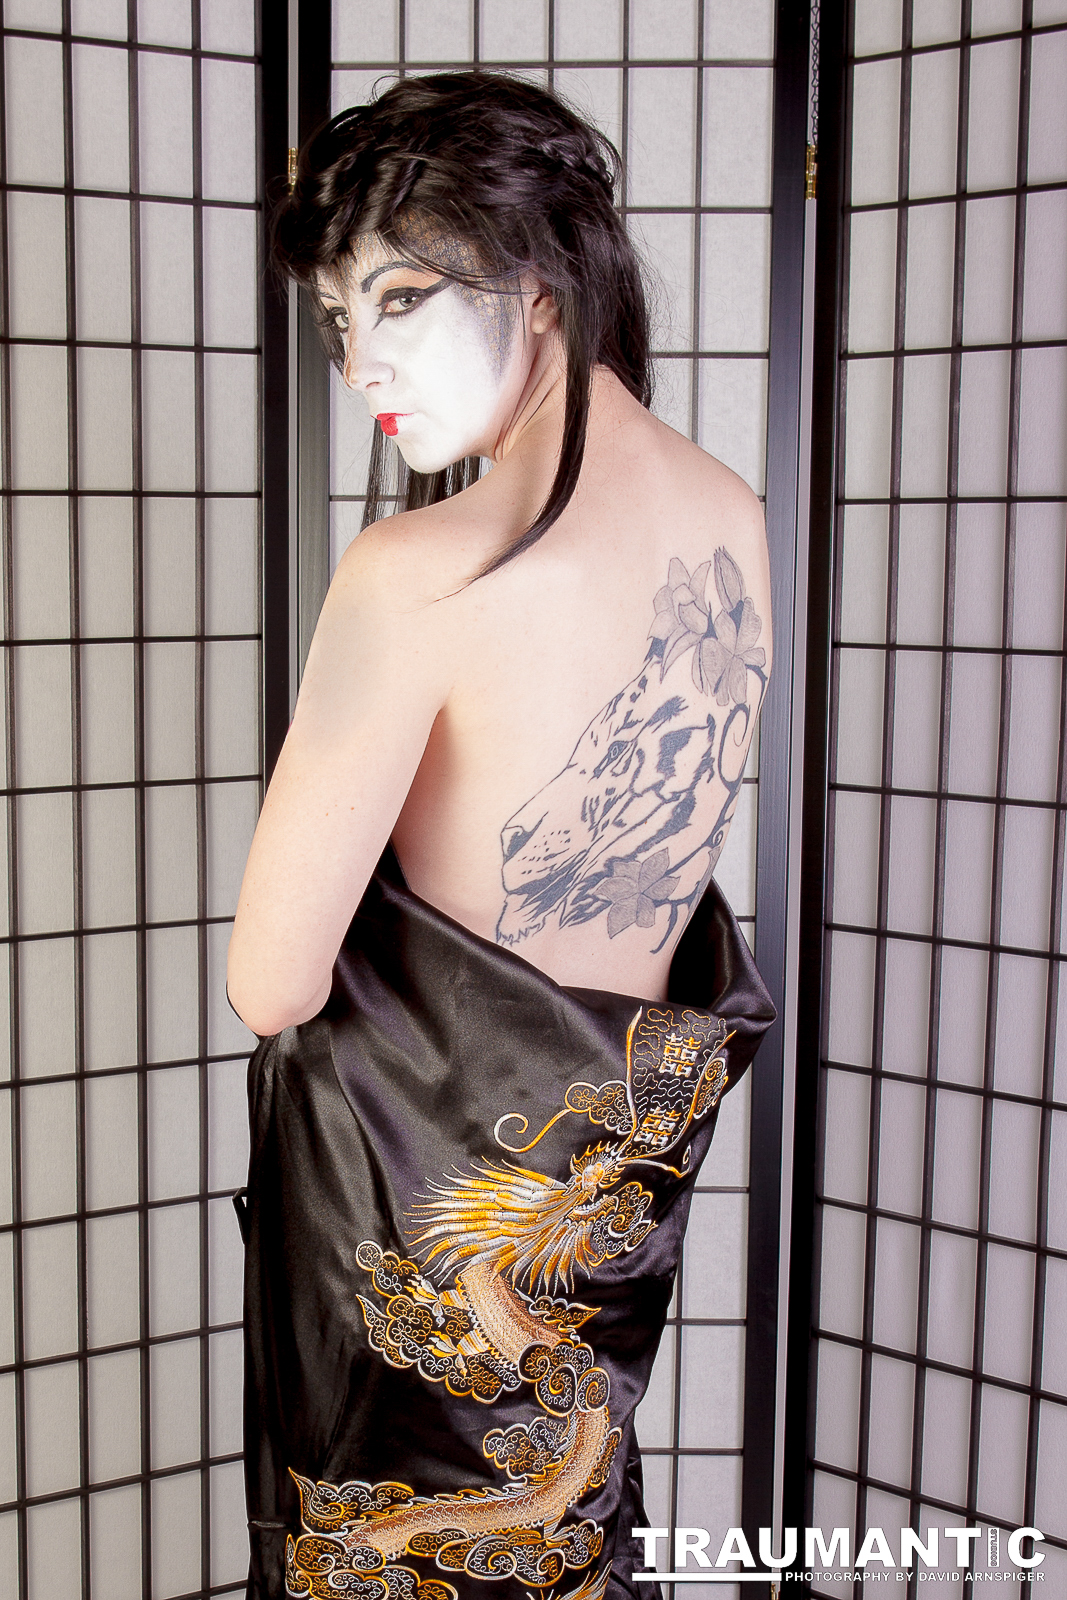 Rebecca and I had been discussing an outdoor shoot with her as a Geisha.  We never did manage to do the outdoor shot, but we did spend an evening together getting these studio shots.